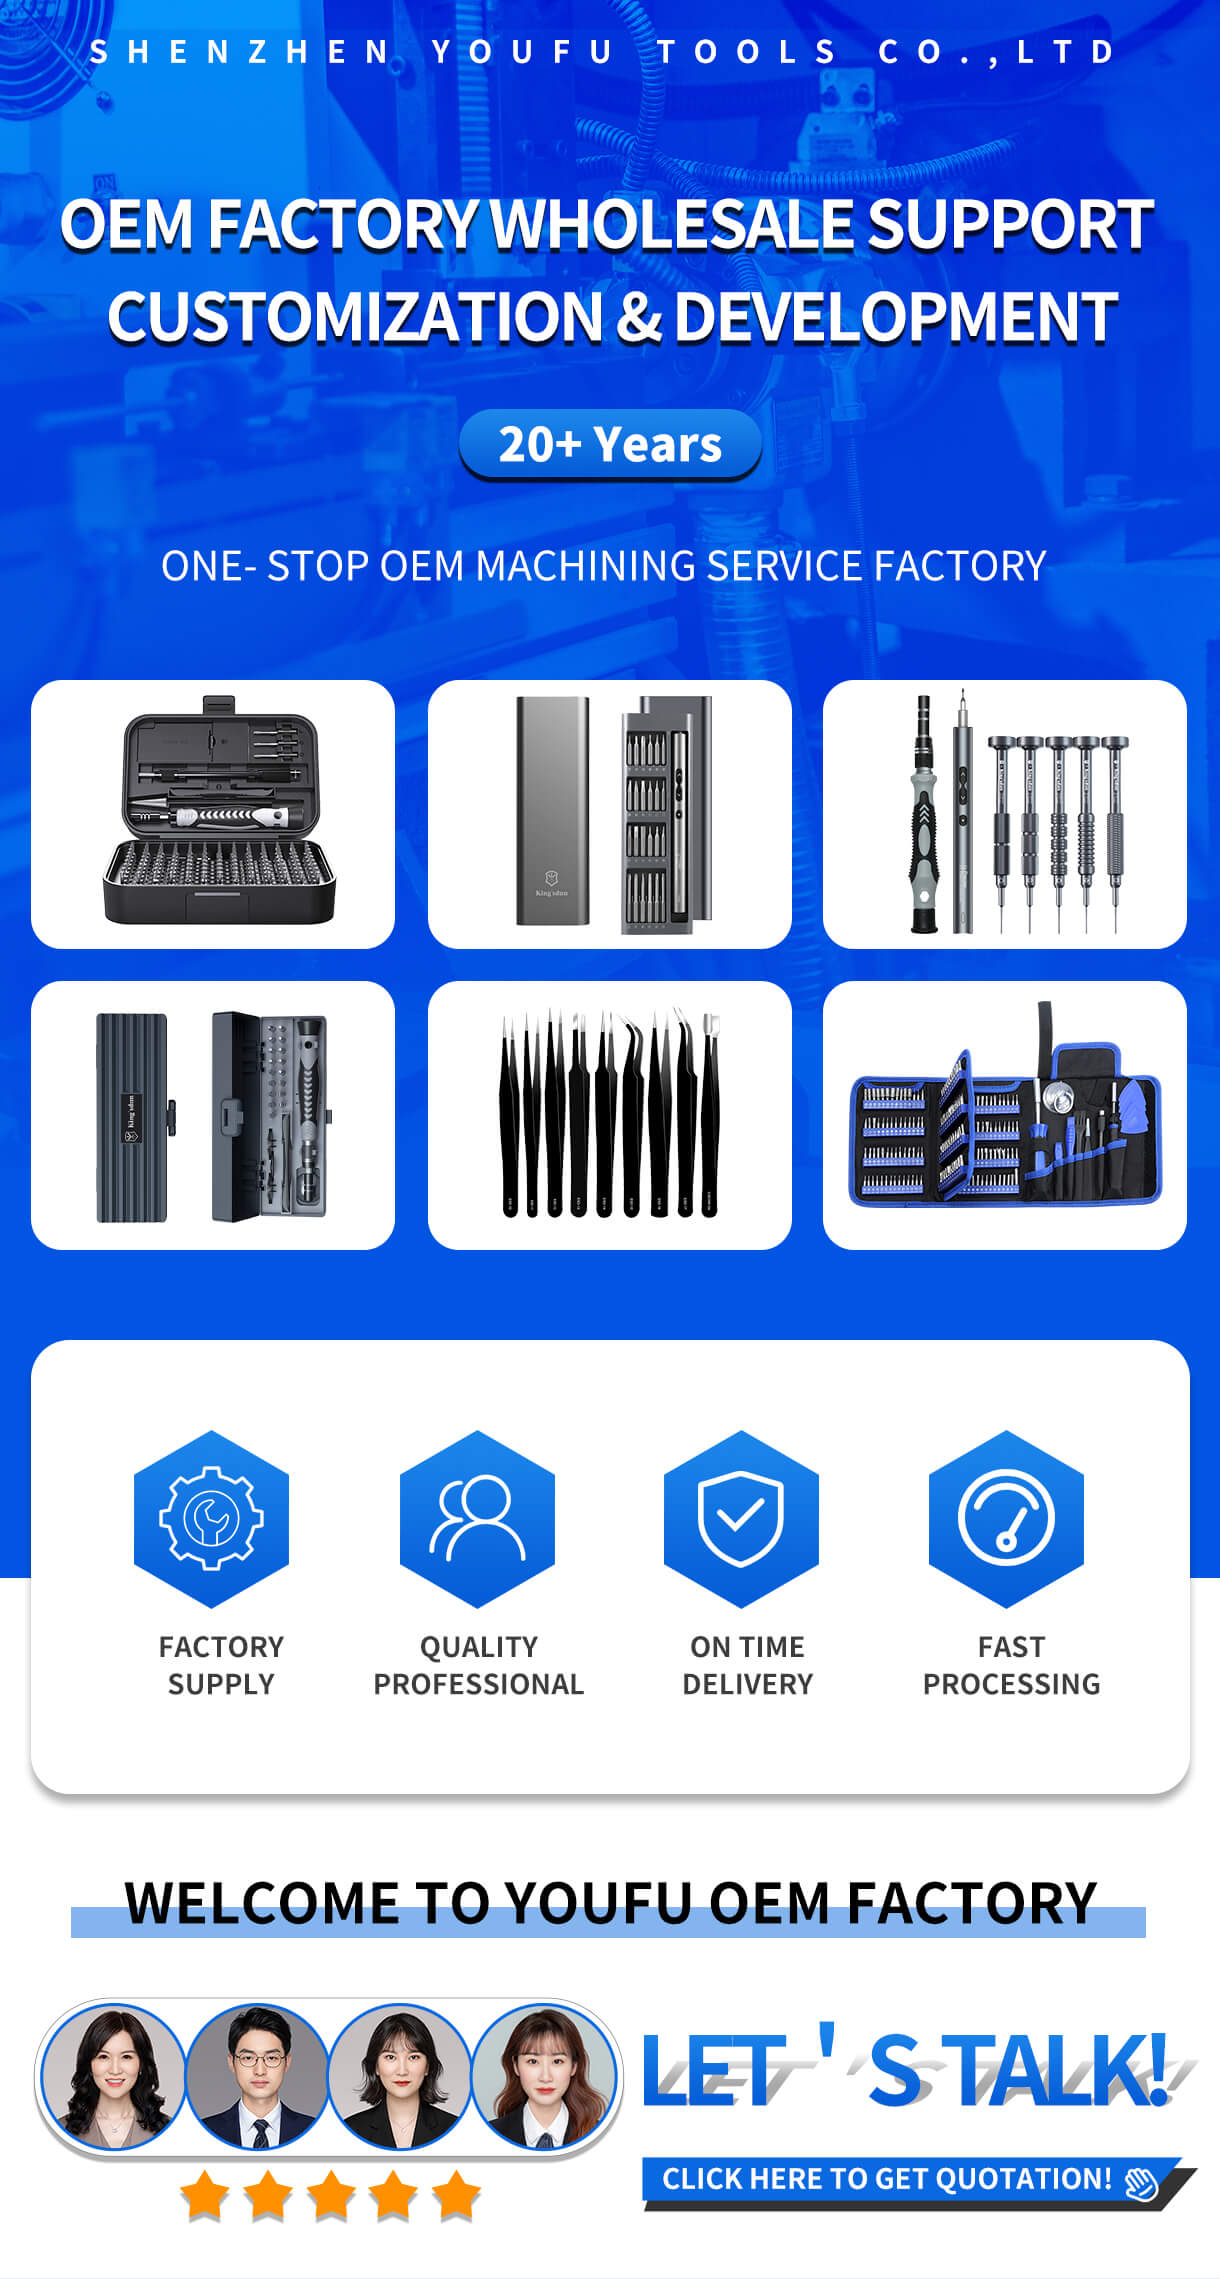 Kingsdun 52 Pcs Ratchet Wrench Set Auto Repair/Hand Mechanic Tool SetApplication: automotive and mechanical services, Auto Repairing, Package:Suitcase, Dimensions:49X21X26.5CM, Product name: Ratchet Wrench Set Auto Repair tool